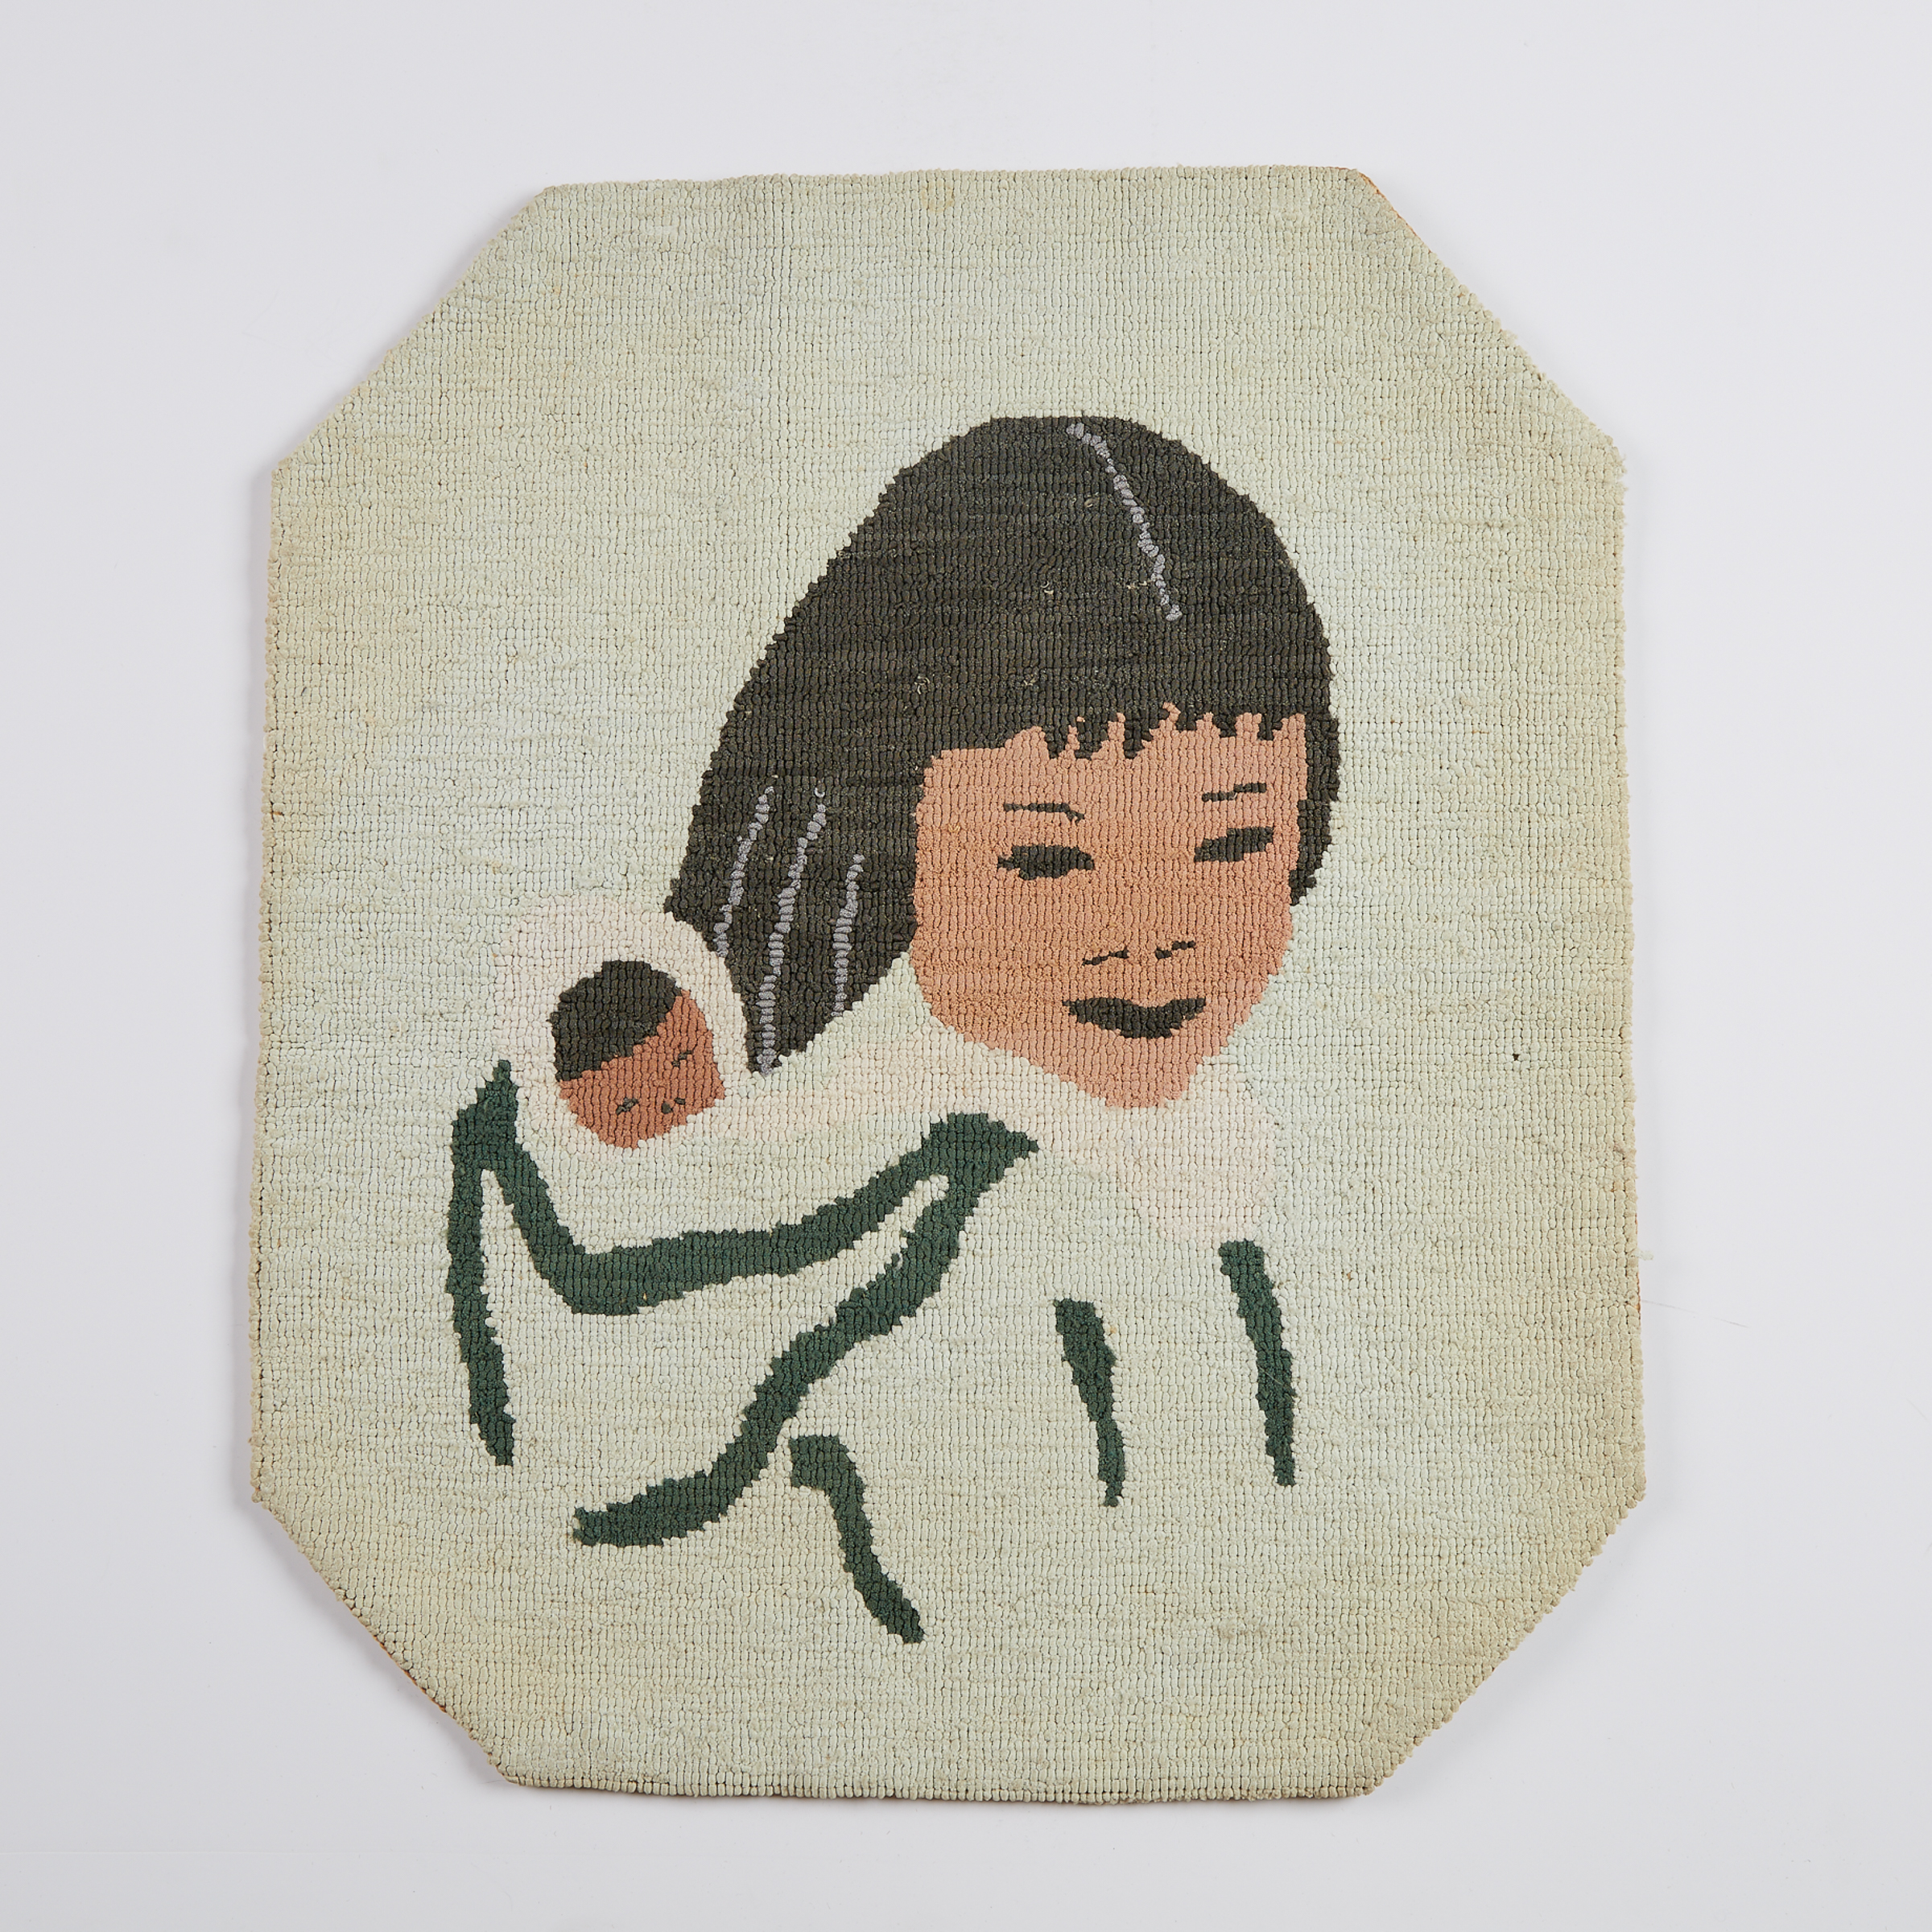 Grenfell Labrador Industries Mother with Child in a Papoose Hooked Mat, c.1930